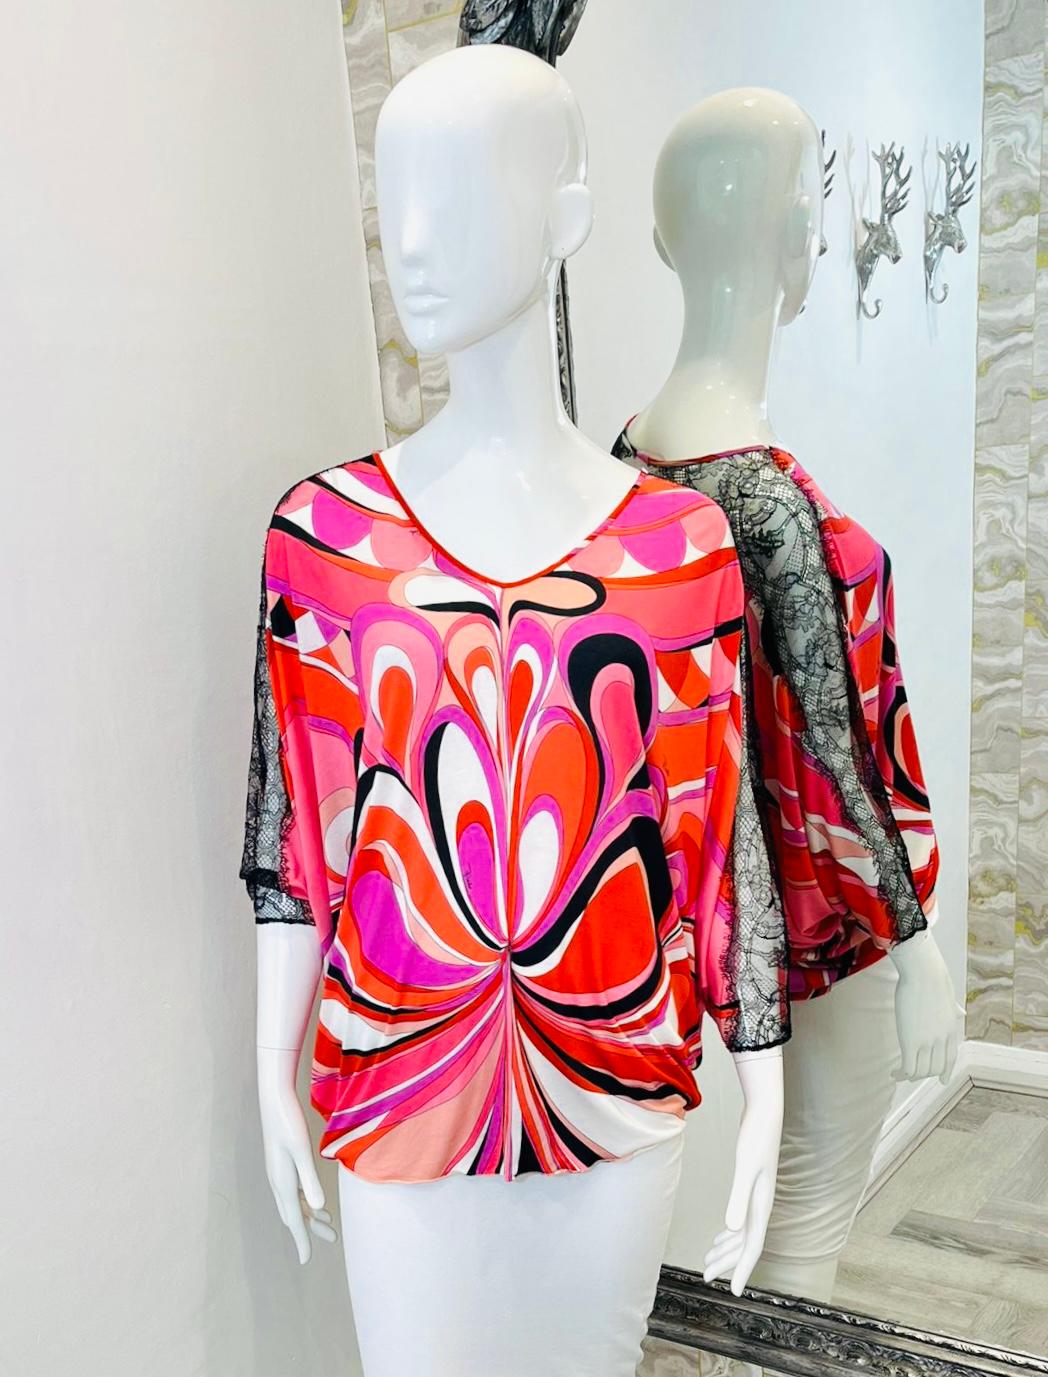 Emilio Pucci Abstract Print Blouse

Multicoloured blouse designed in the shades of pink and red.

Detailed with black lace inserts along the three-quarter sleeves.

Featuring scoop neckline and cut-out accent to rear.

Loose fit silhouette with